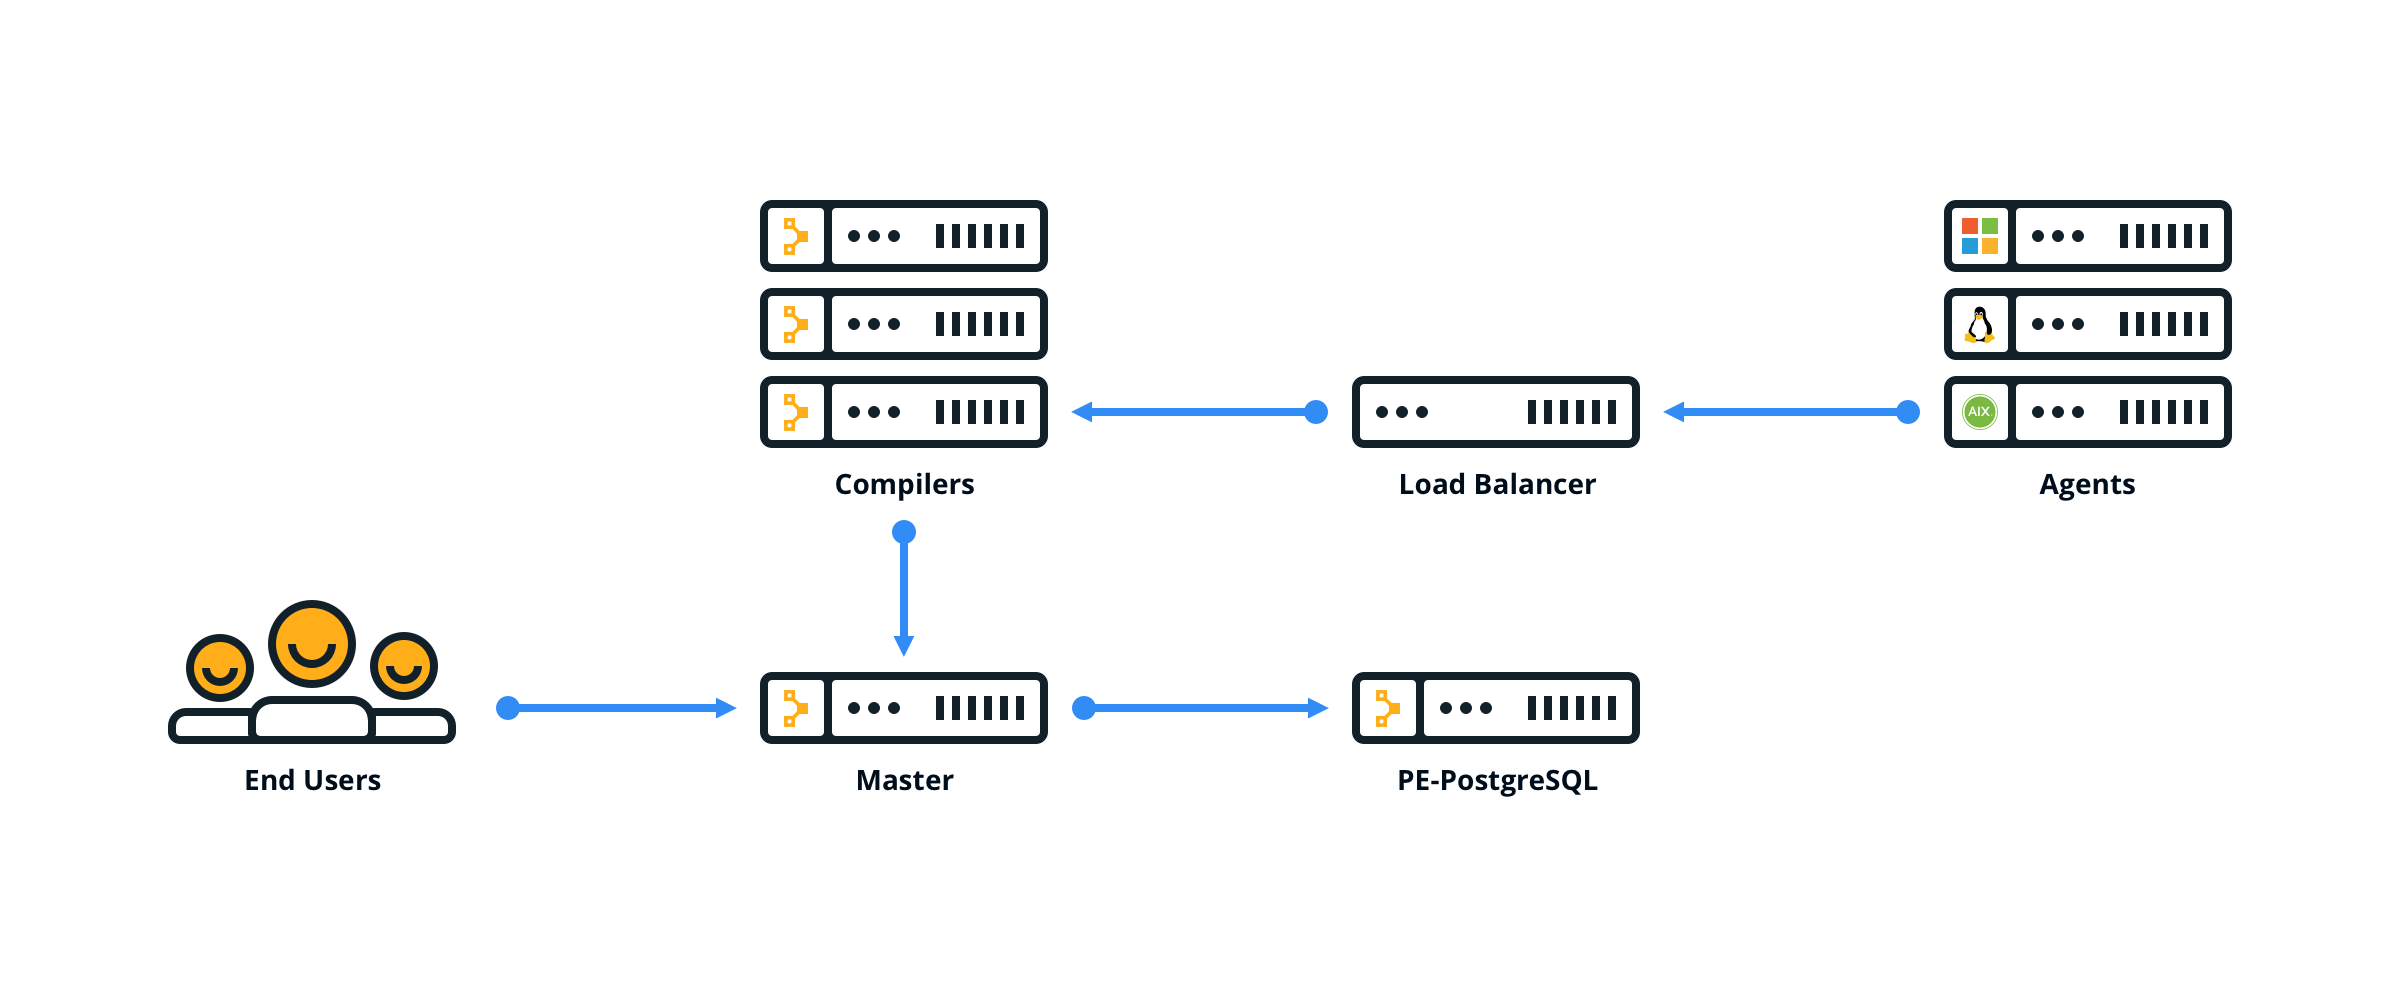 Graphic showing an extra-large reference architecture, where end users interact with a single master. The master interacts with multiple compilers, multiple agents, and a standalone PE-PostgreSQL node.